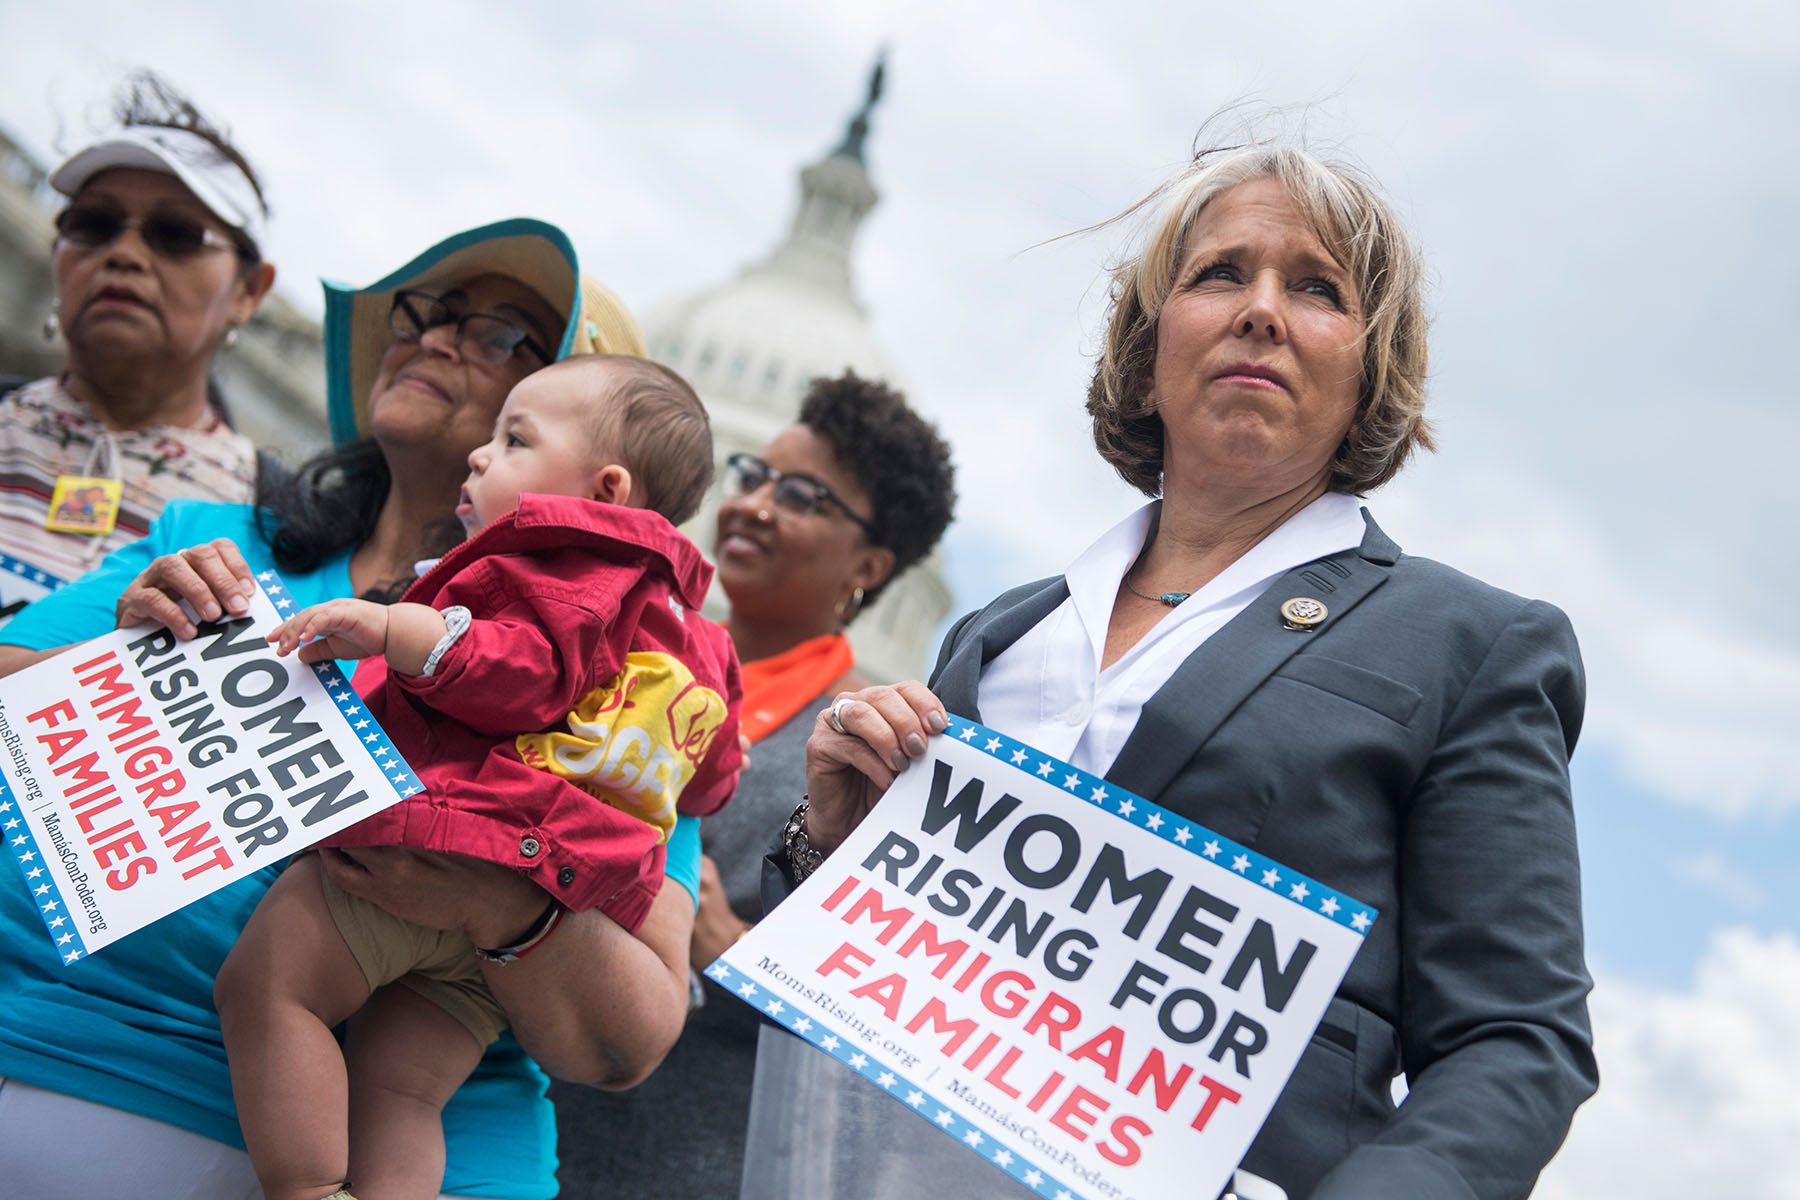 Michelle Lujan Grisham holds a sign that reads "Women rising for immigrant families" in front of the U.S. Capitol.